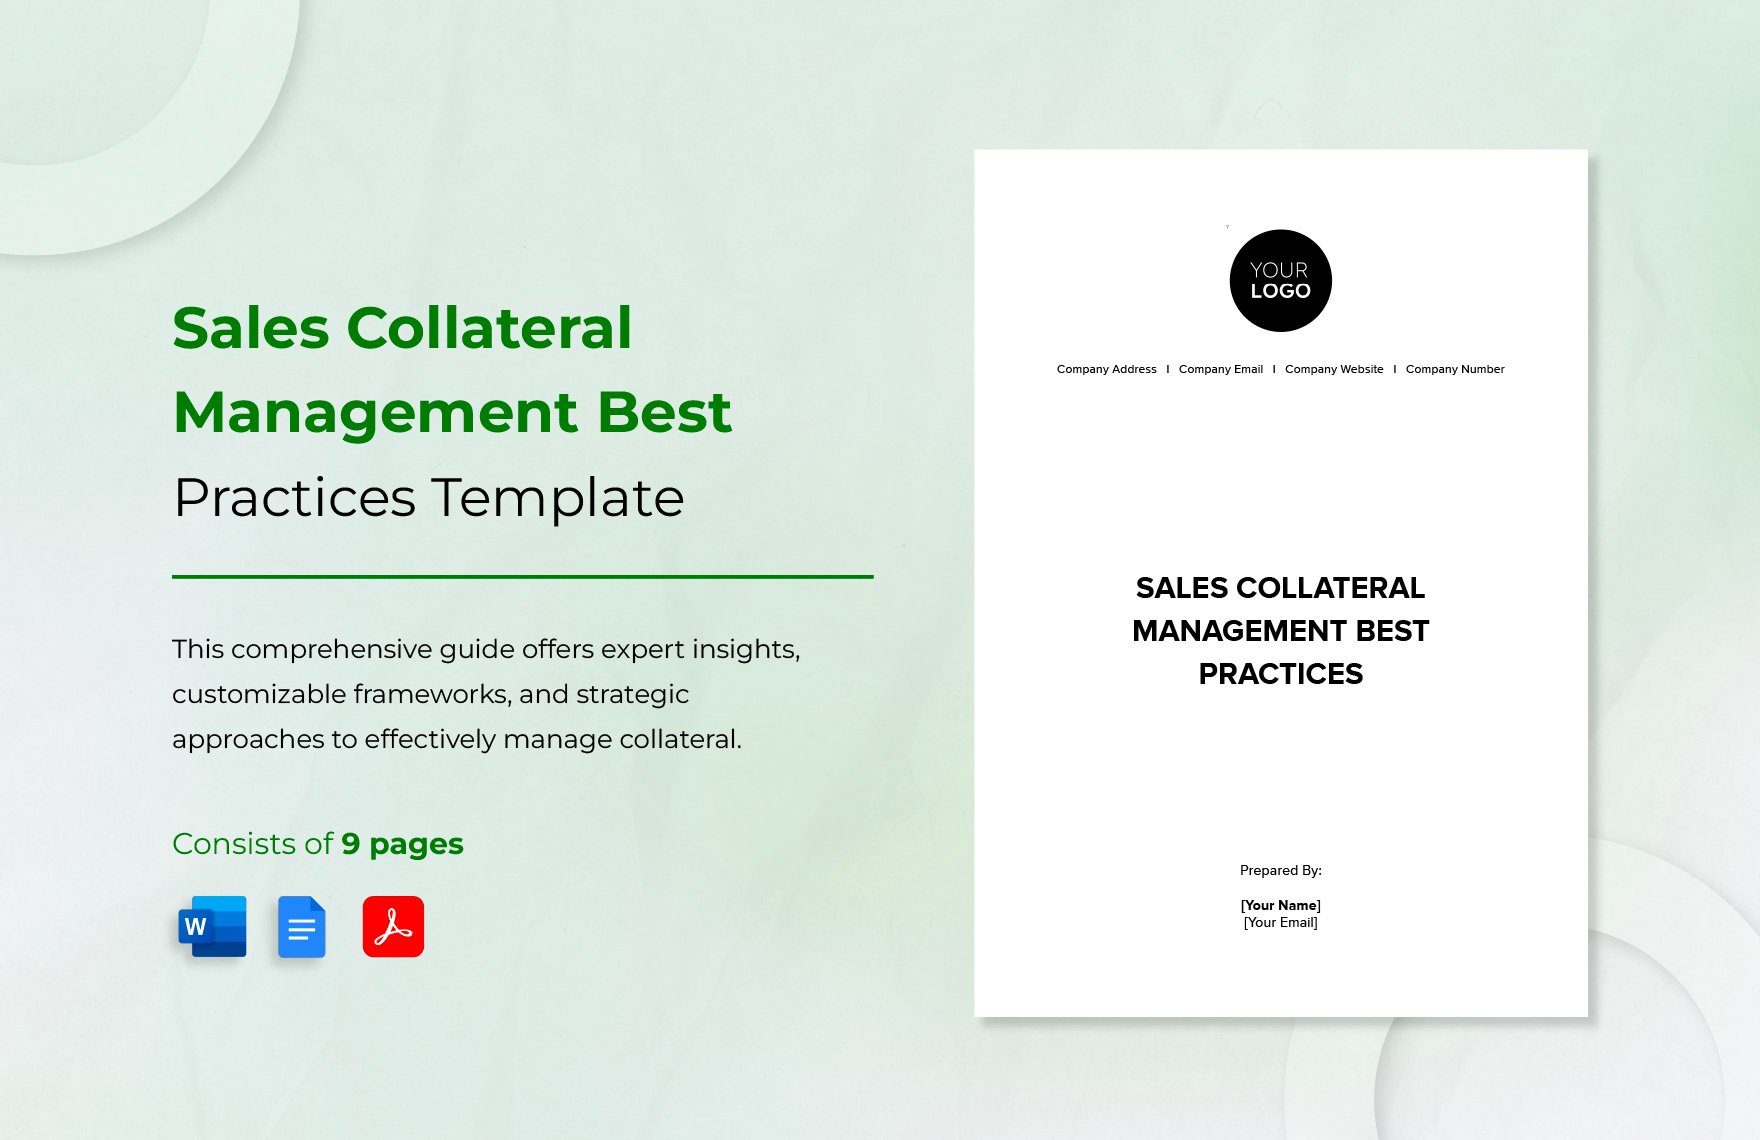 Sales Collateral Management Best Practices Template in Word, Google Docs, PDF